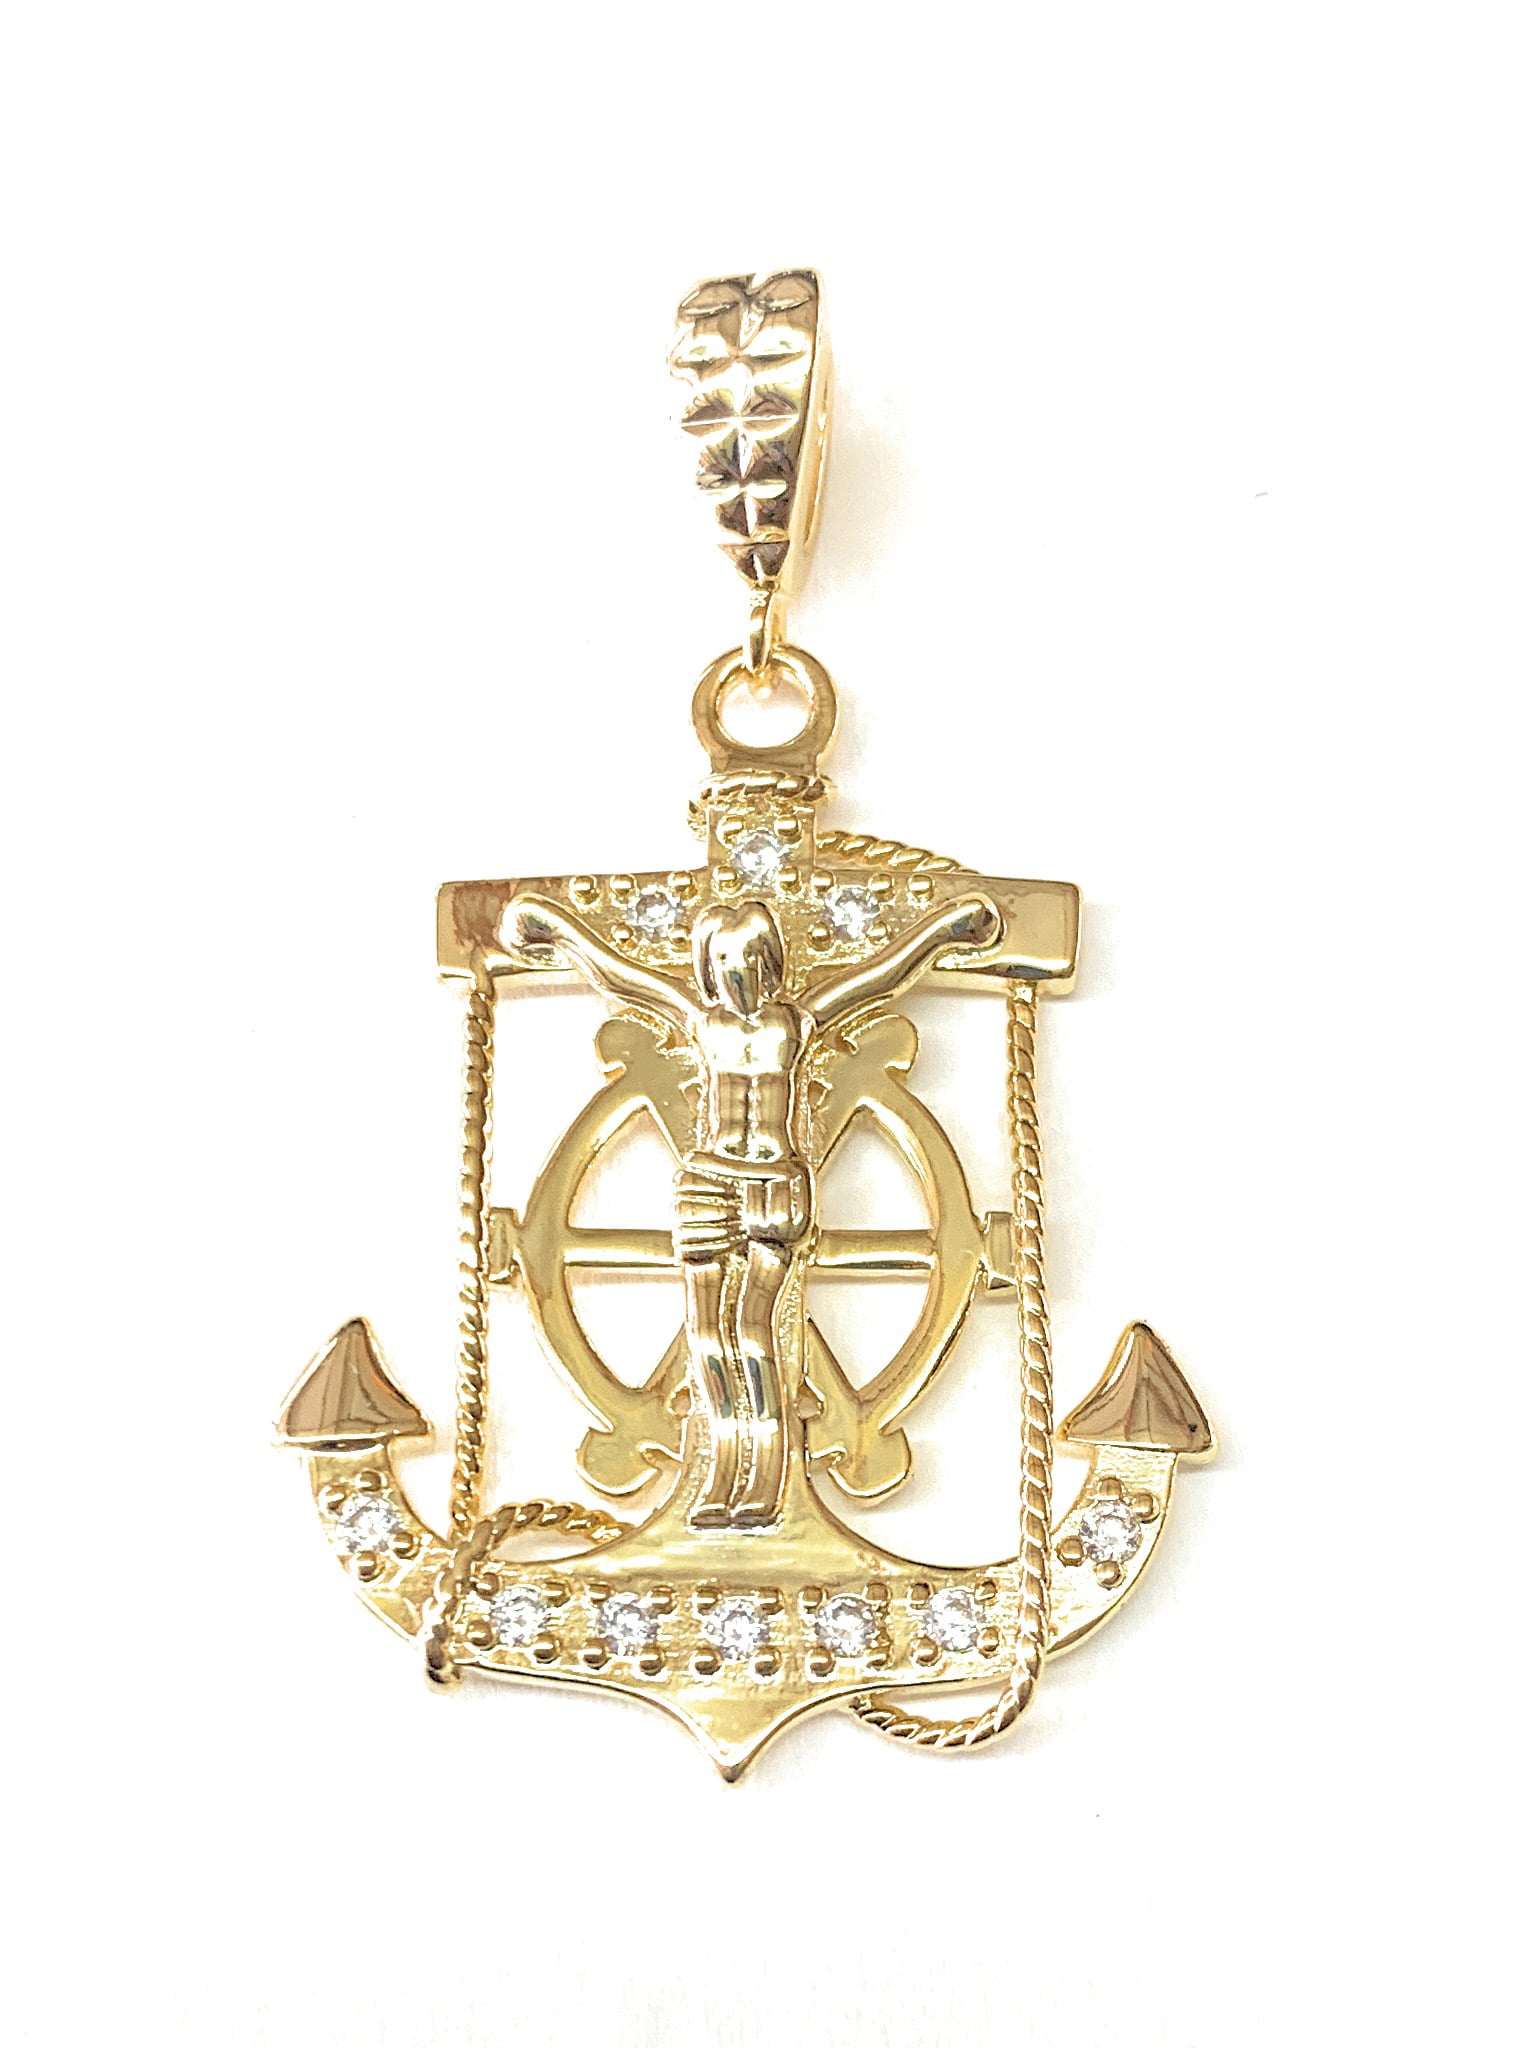 14K Yellow Gold Sailor Nautical Pendant 14k Stamped Real Gold -Suitable for Men & Women Matches with All Types of Chains Jesus Cross Anchor Charm Pendant 23x18 mm Great Gift for All Occasions 